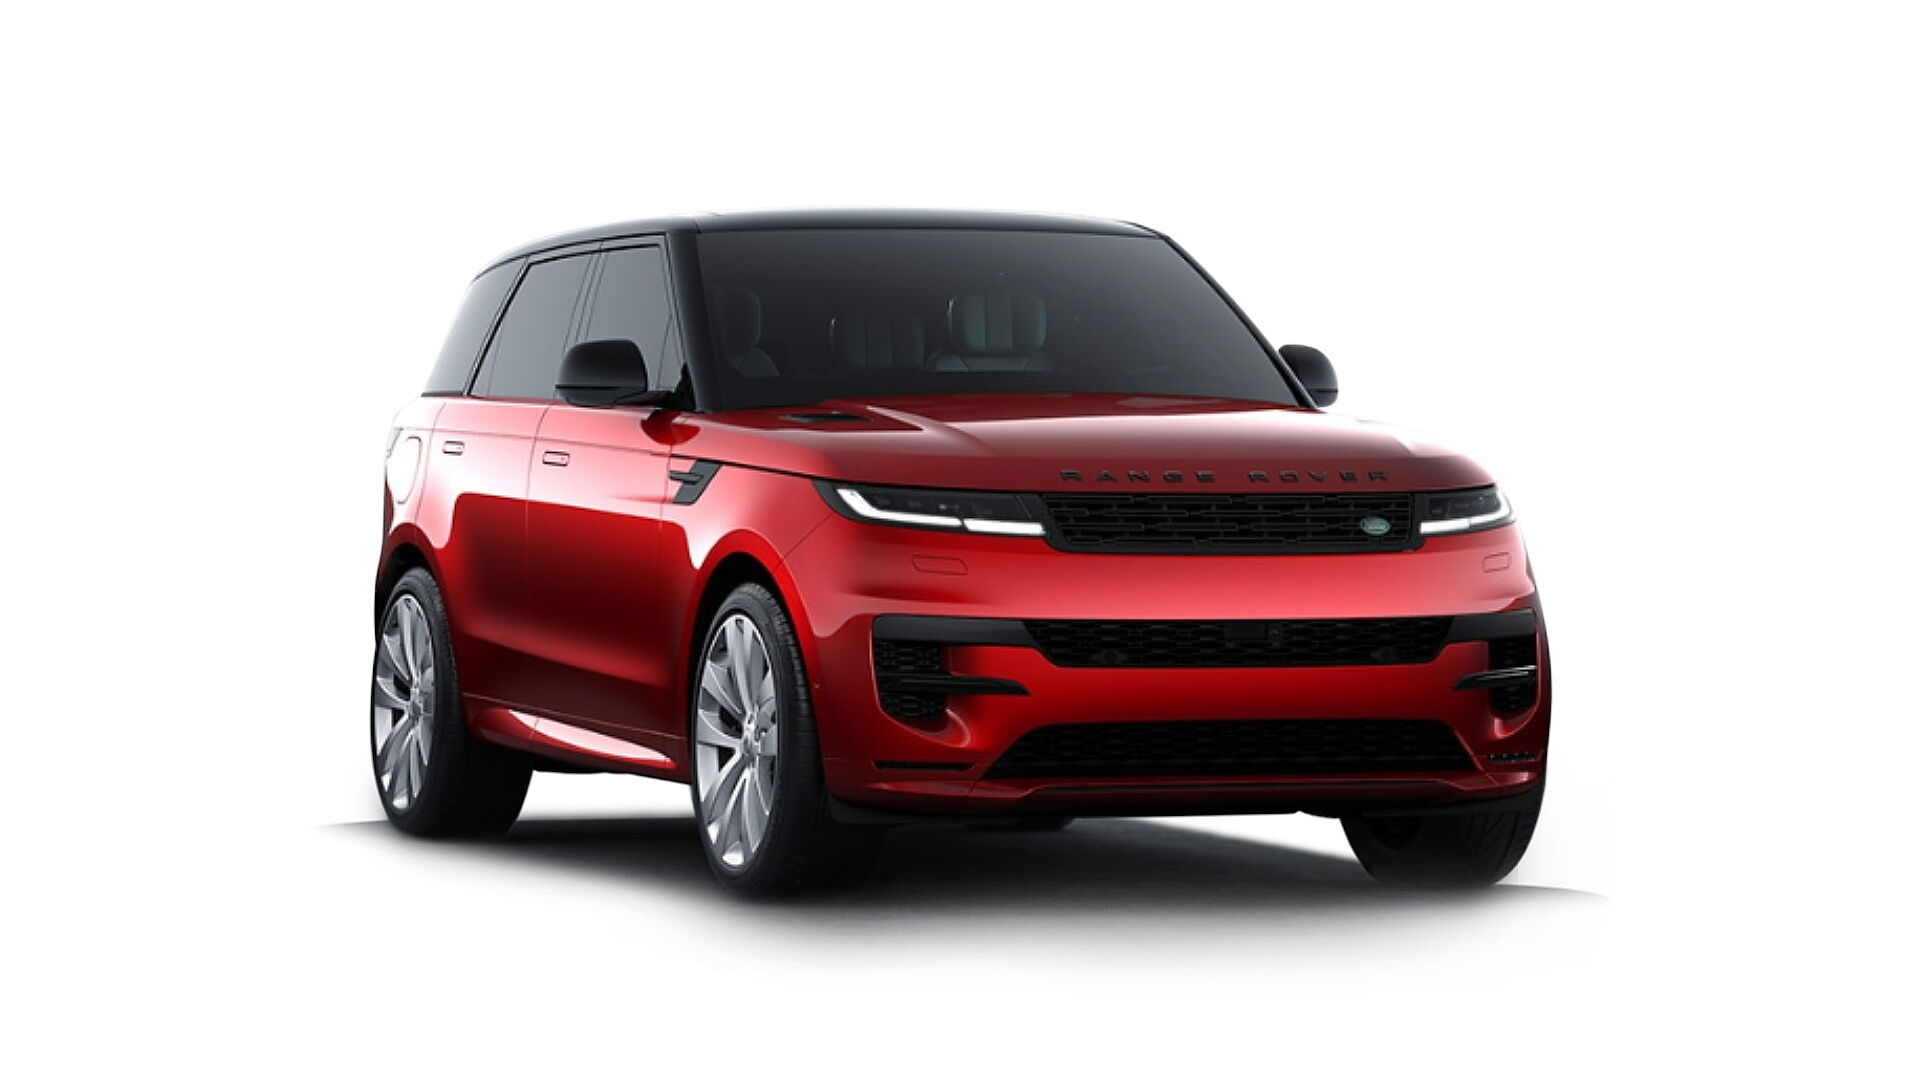 2013 Land Rover Range Rover Sport Price, Value, Ratings & Reviews